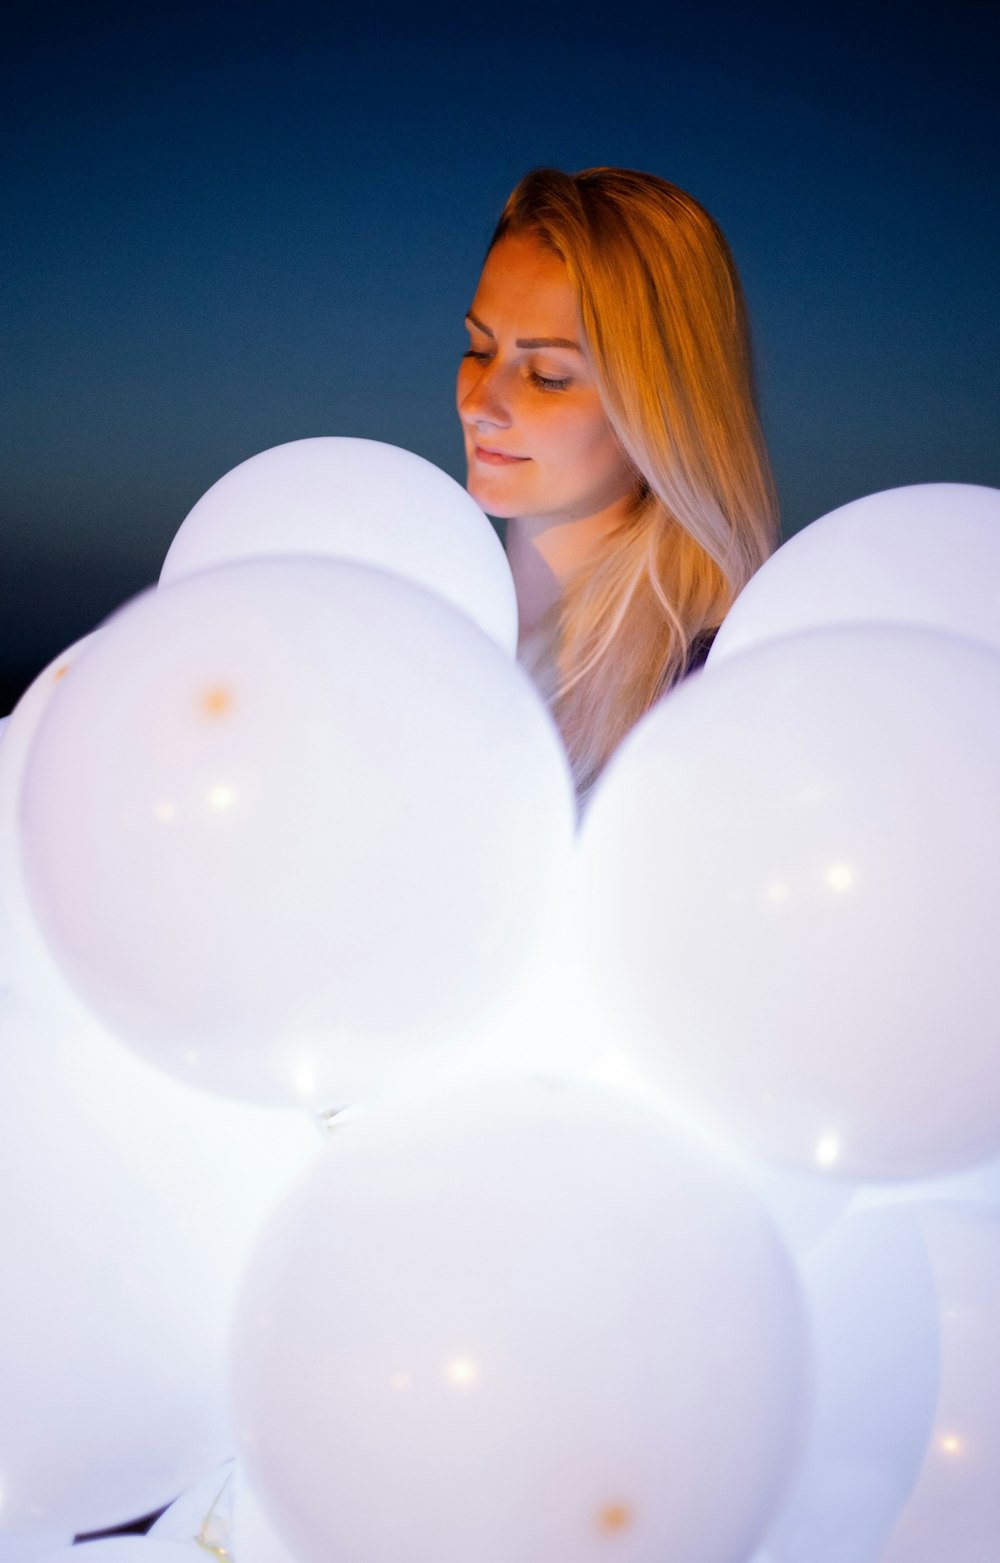 a woman looking at a white balloon